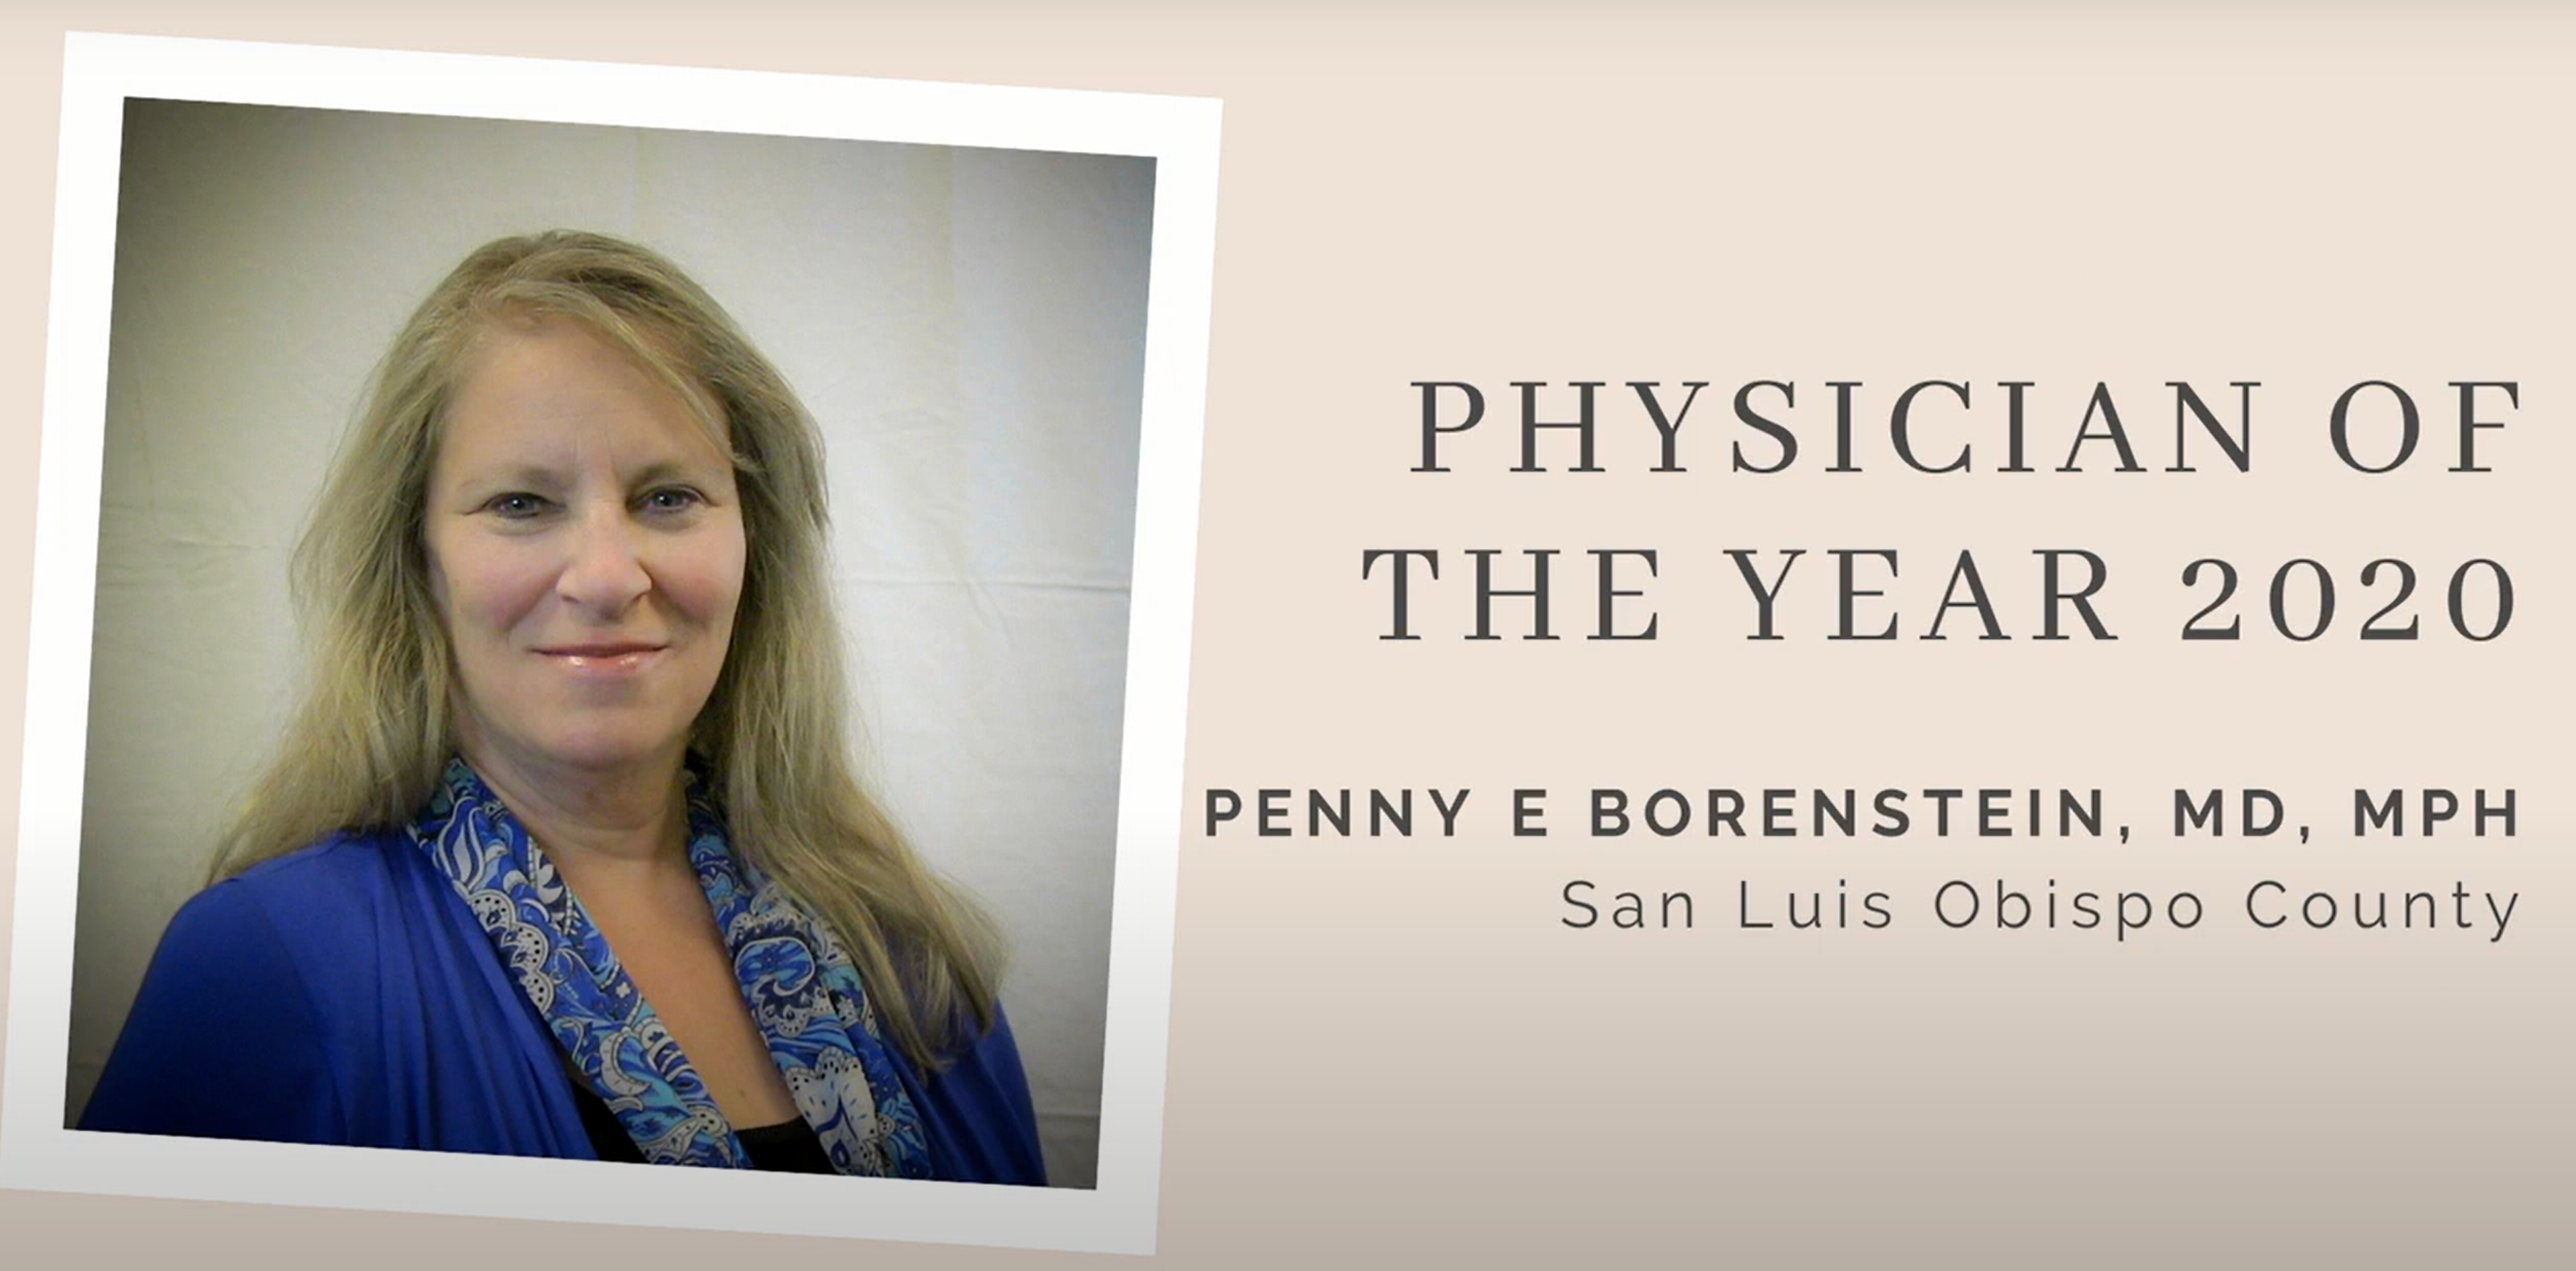 Image announcing Dr. Borenstein as Physician of the Year